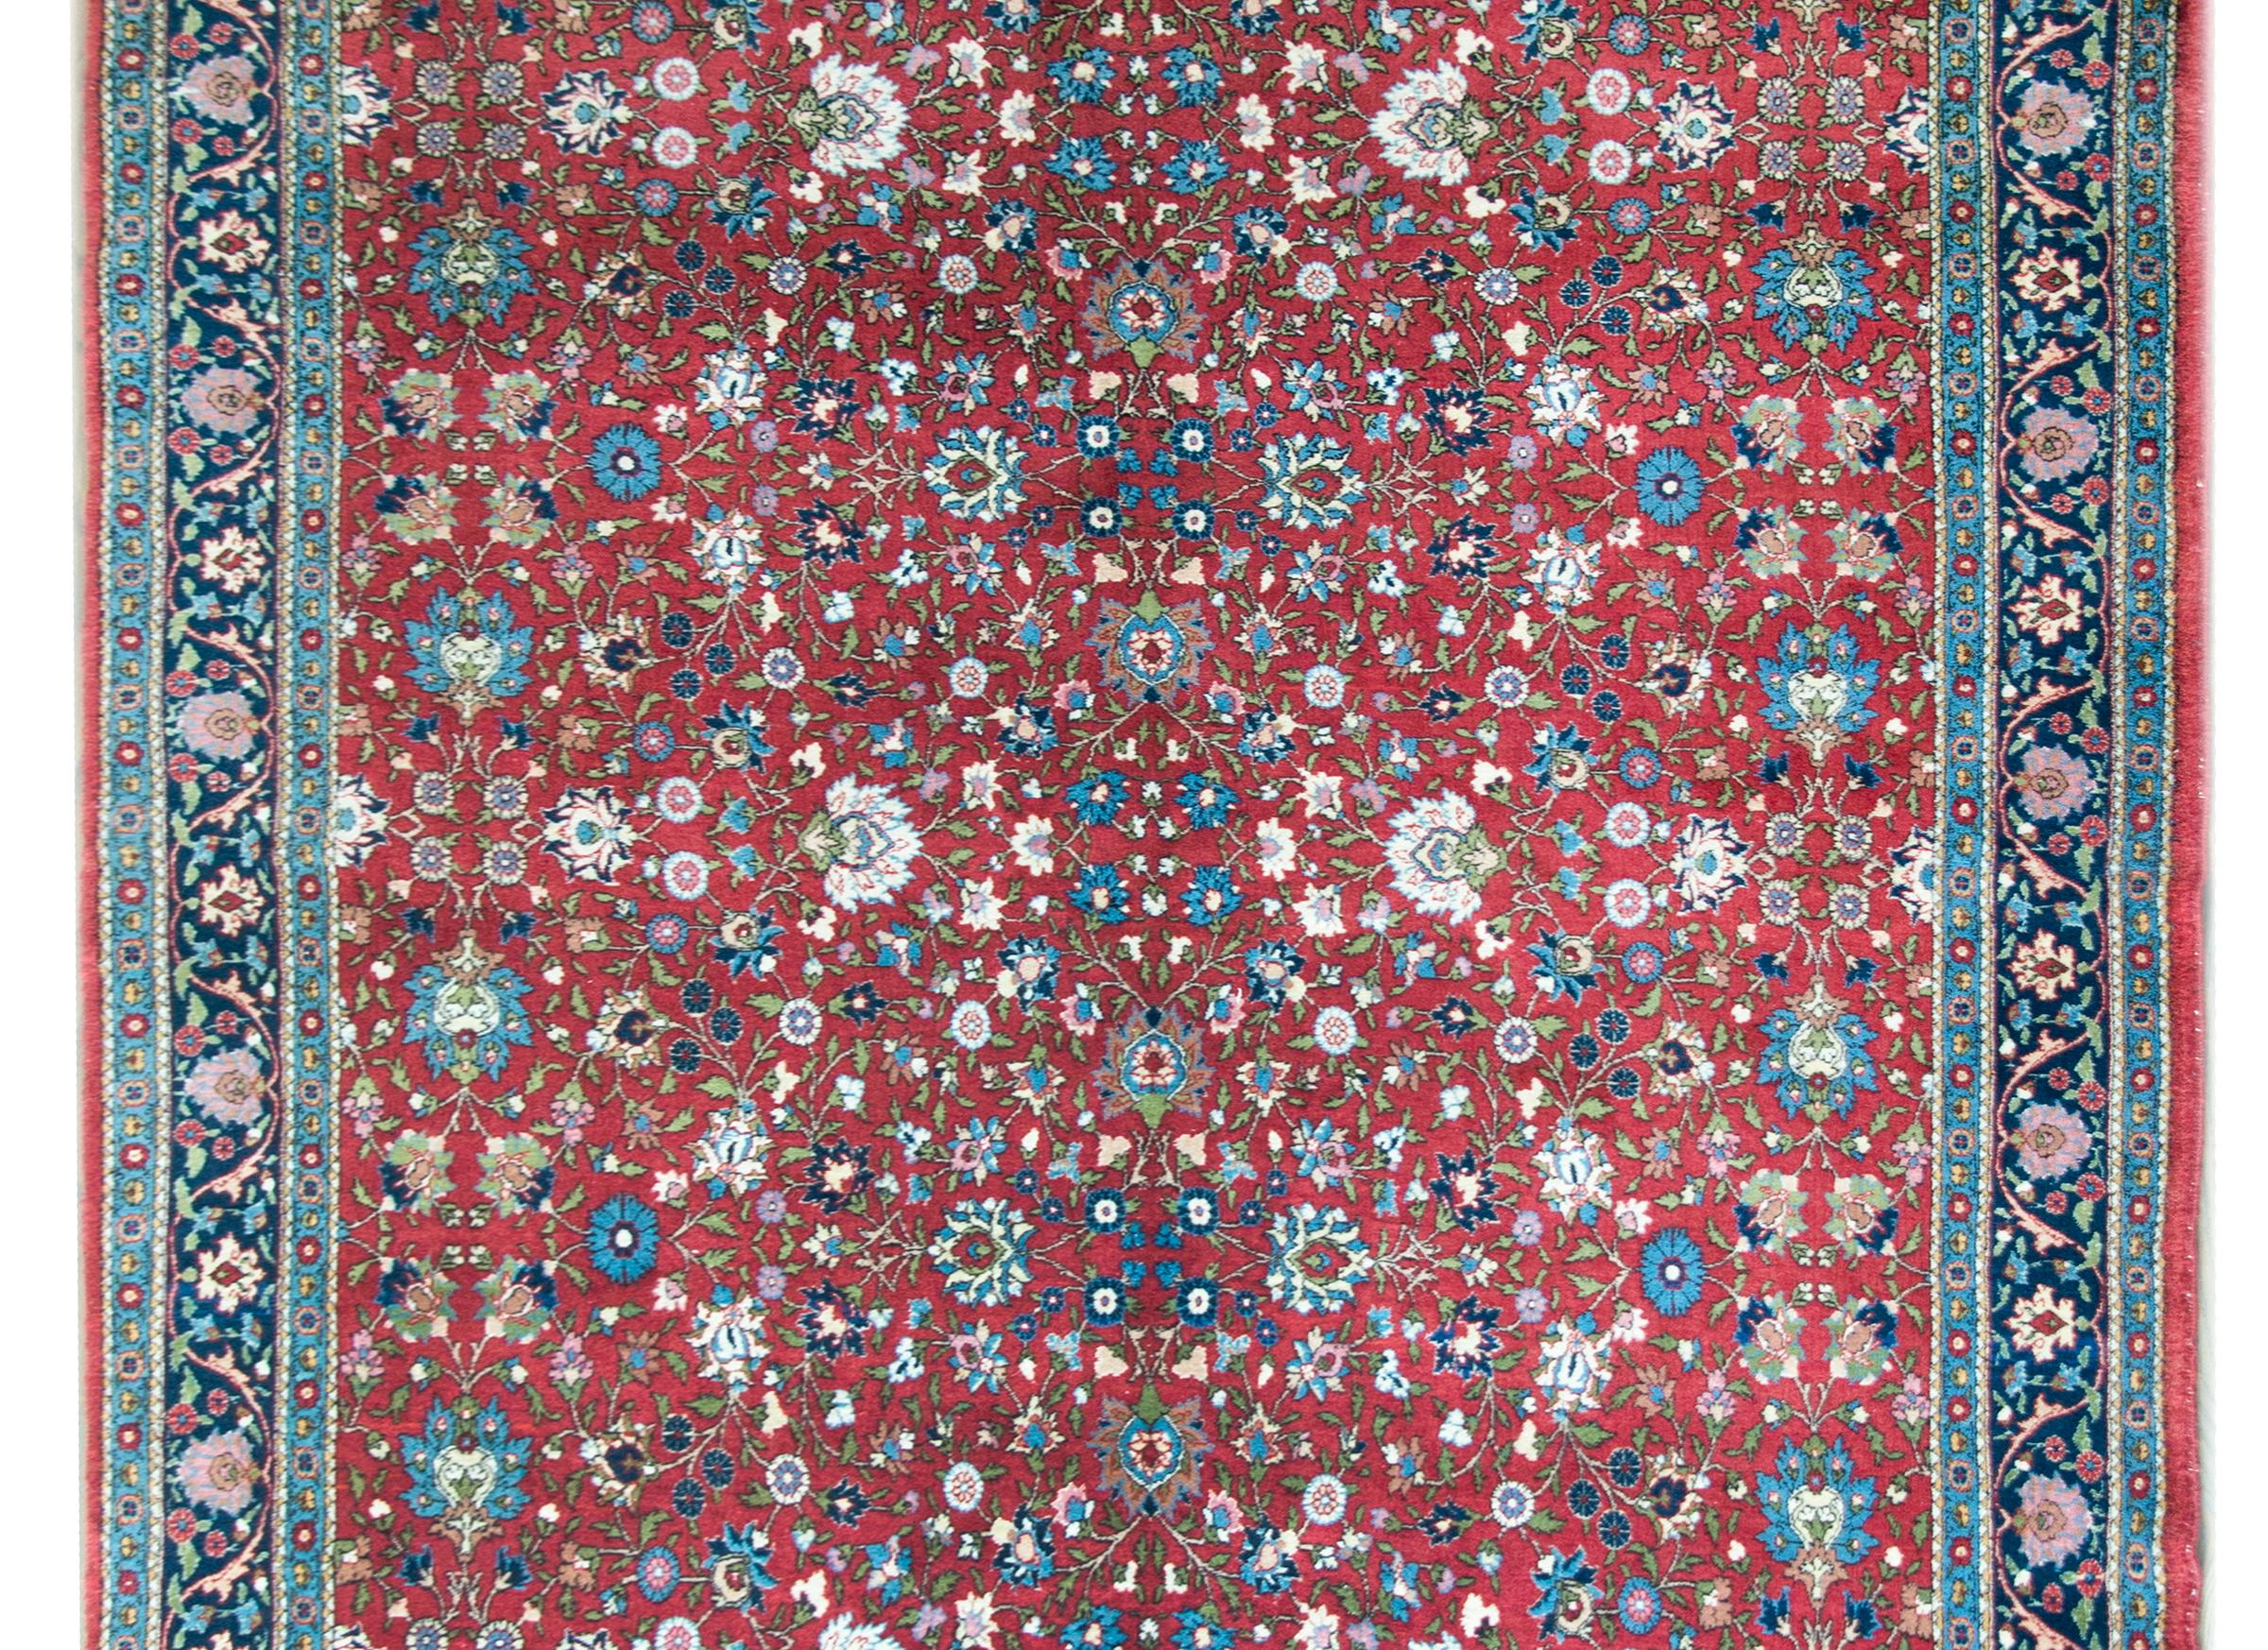 A wonderful mid-20th century Persian Varamin rug with an all-over mirrored trellis floral pattern with large-scale flowers and scrolling vines woven in light and dark indigo, green, pink, and white, set against a crimson background.  The border is